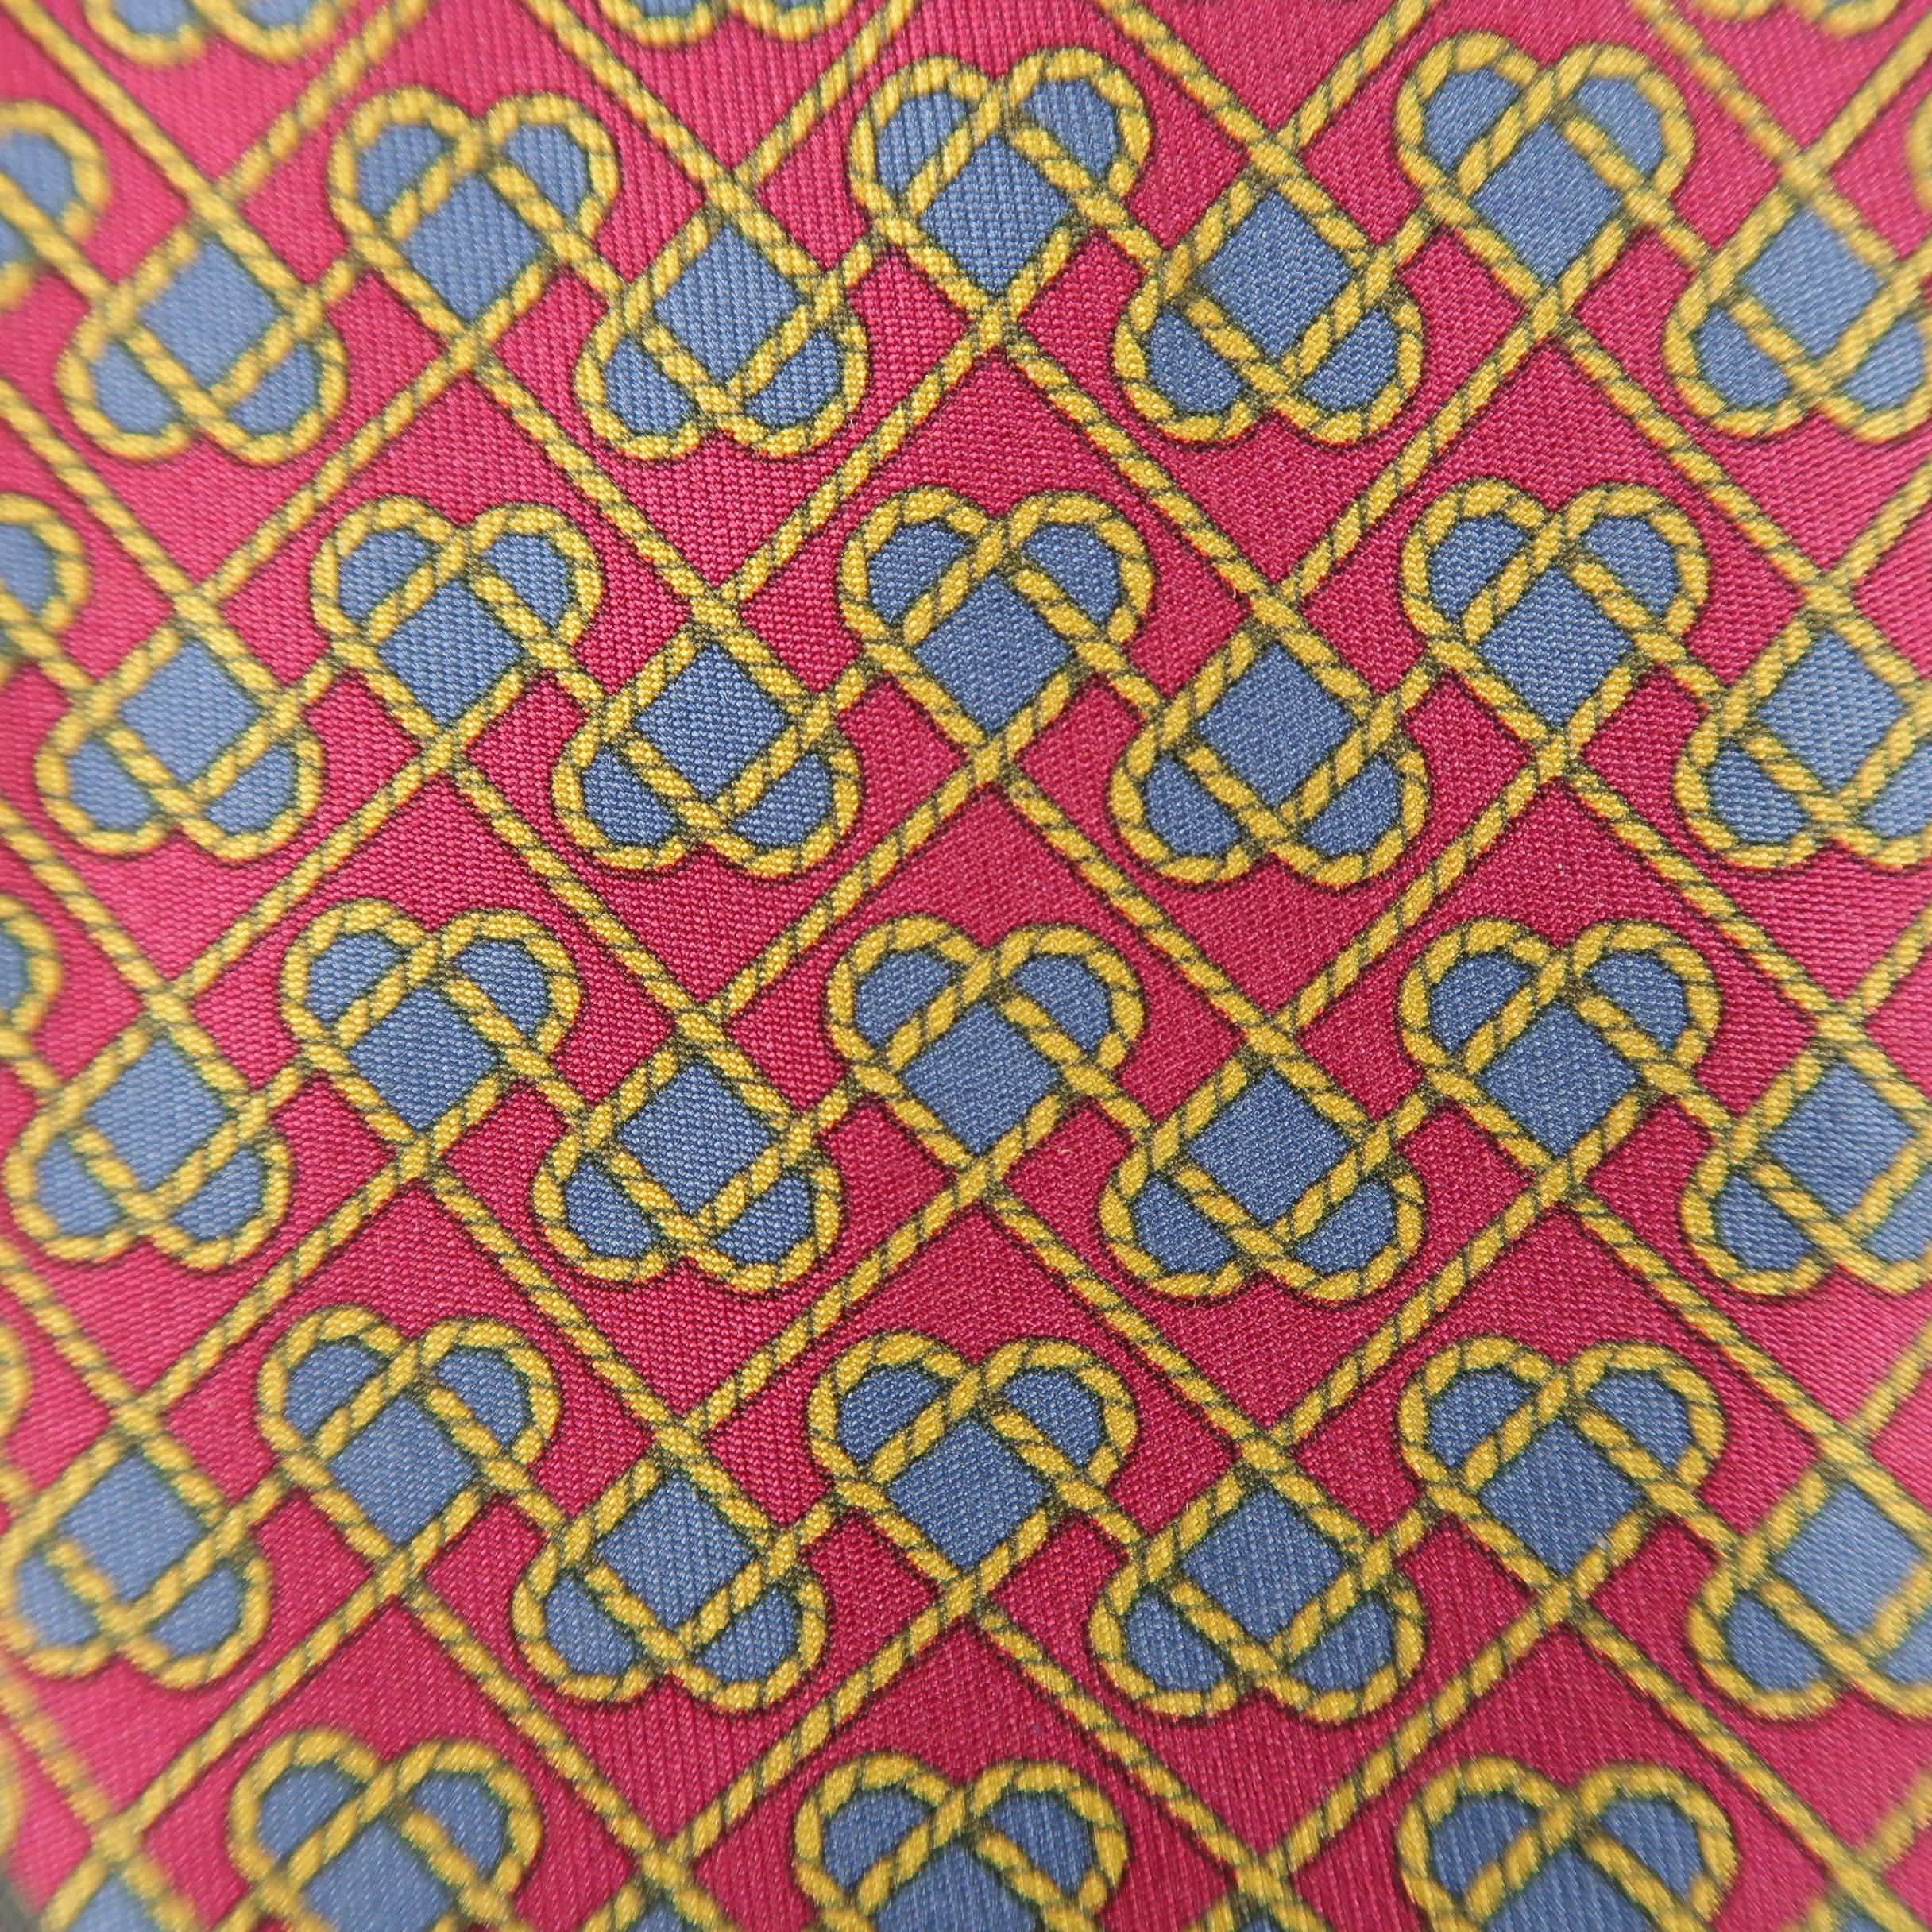 Vintage HERMES necktie comes in muted raspberry red silk twill with all over gold rope blue hearts print. Made in France.
 
Excellent Pre-Owned Condition.
 
Width: 3.25 in.
